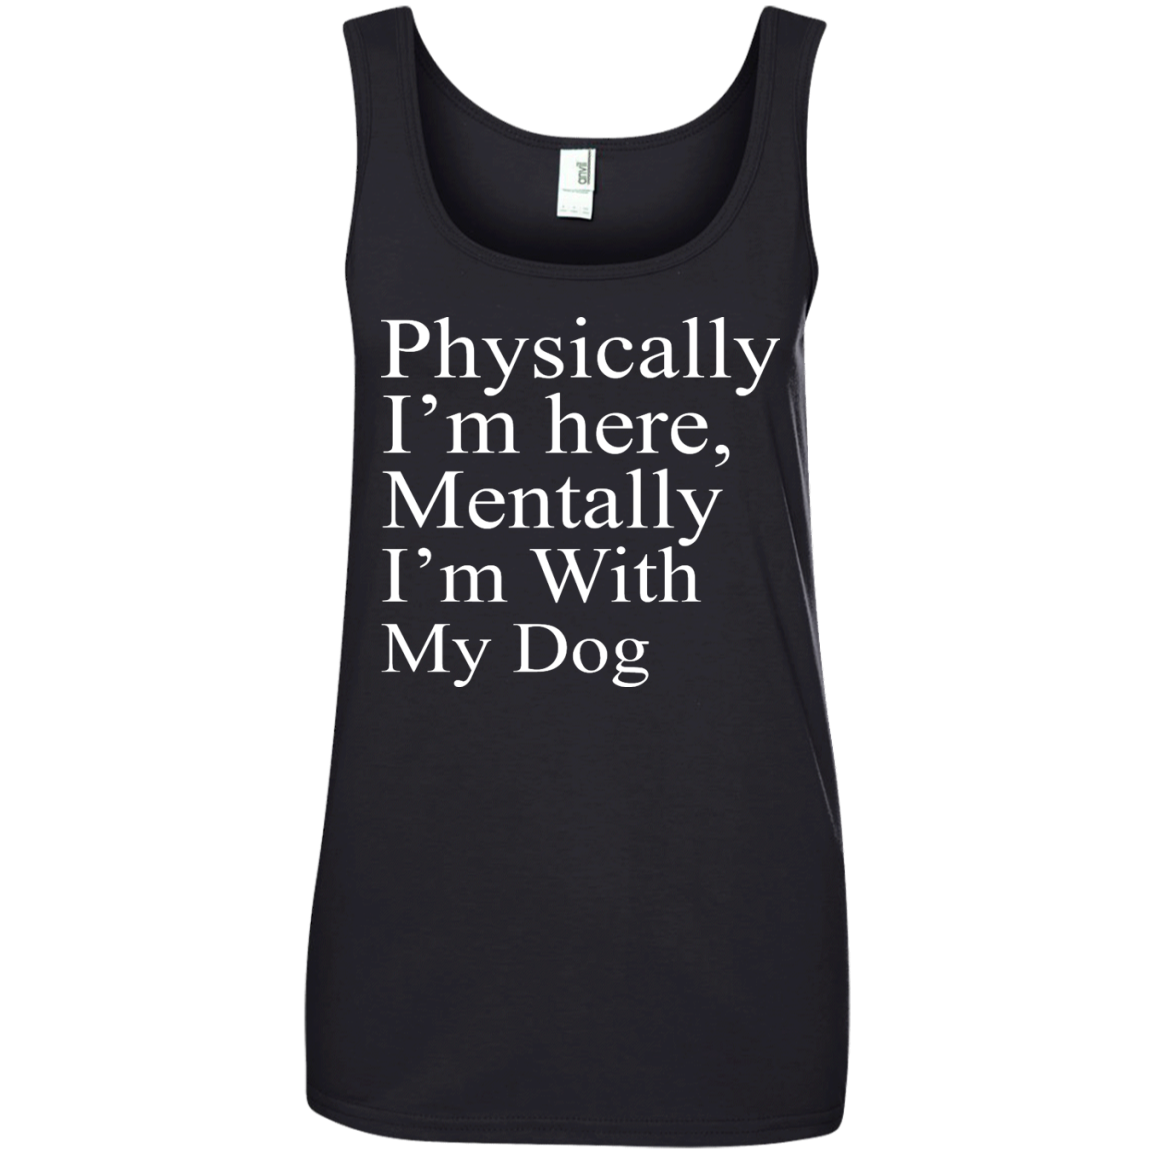 Physically I'm Here Mentally With My Dog shirt, sweater, tank